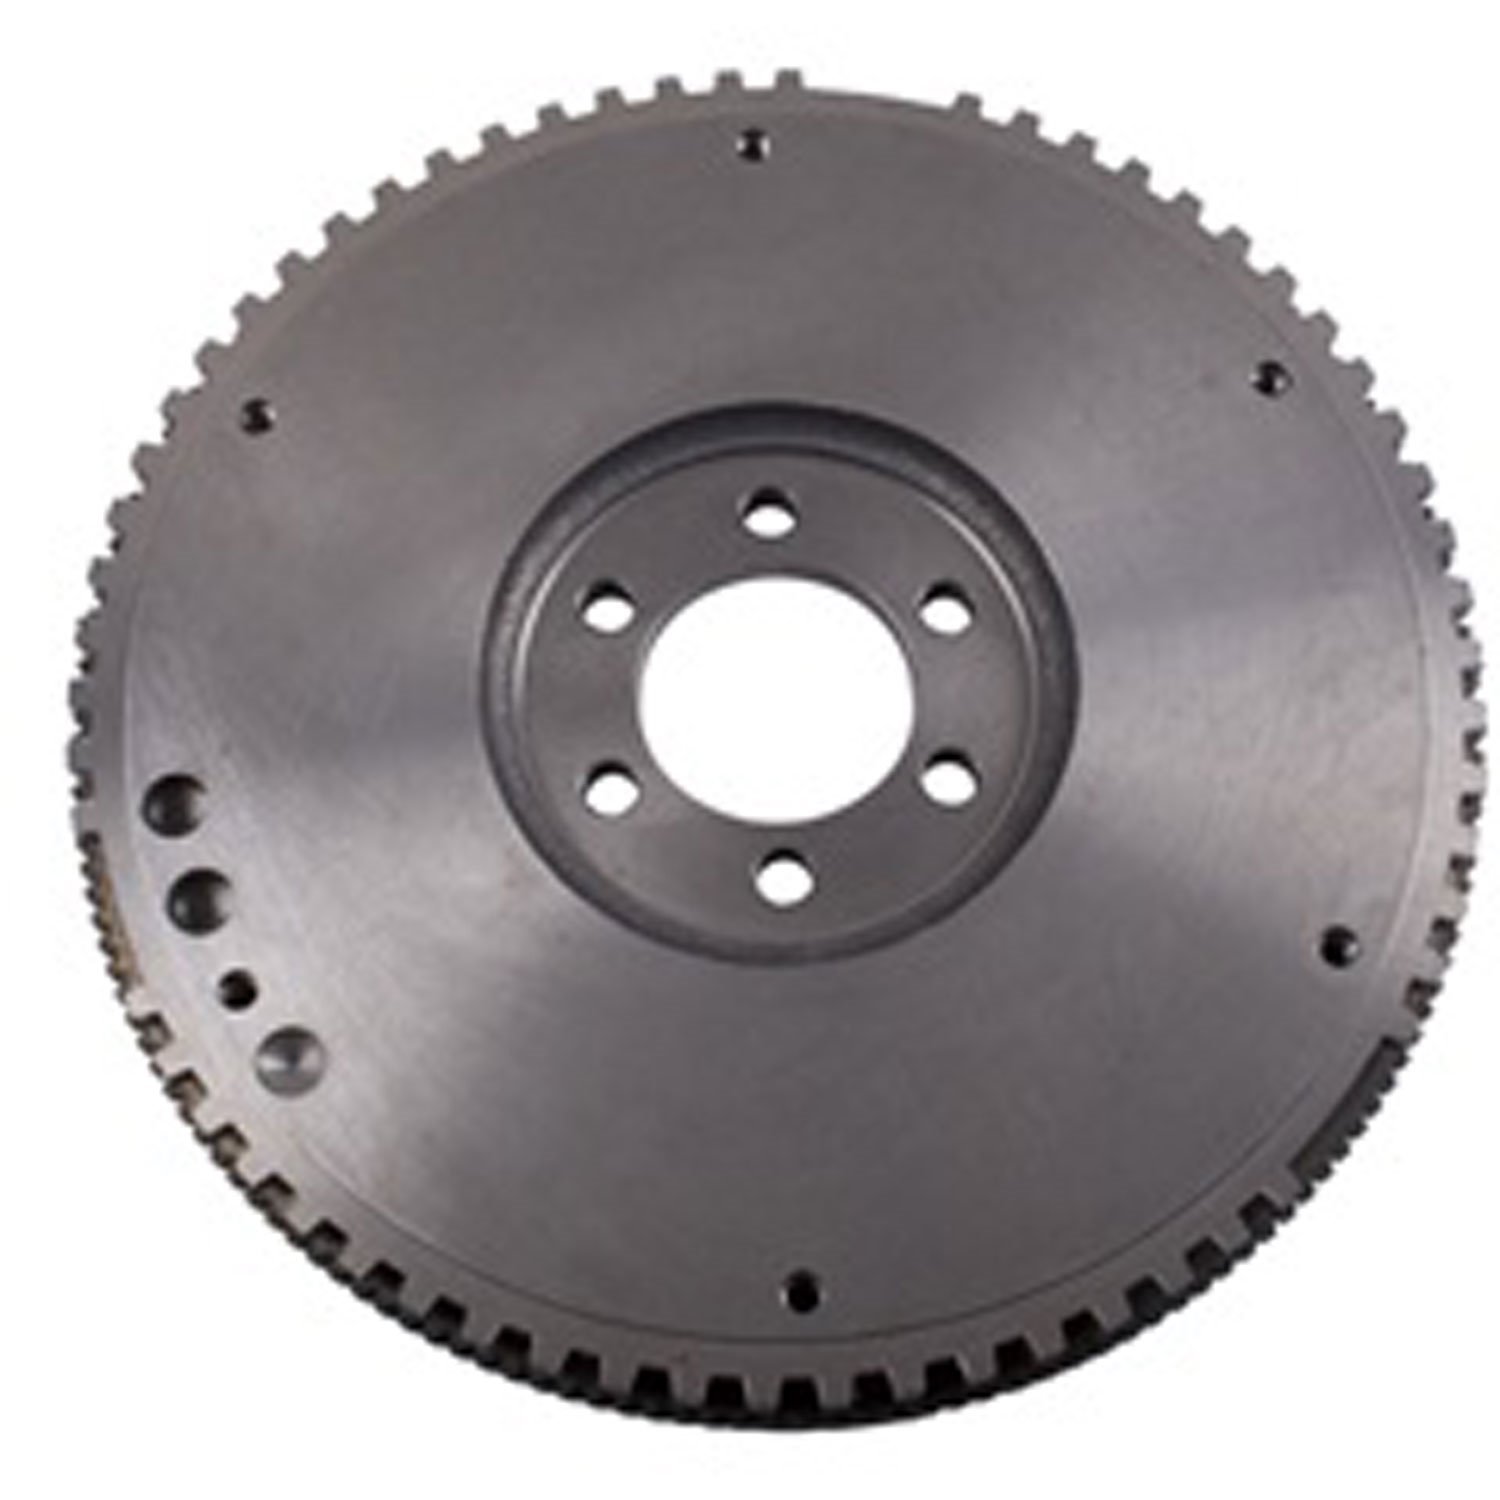 Replacement flywheel from Omix-ADA, Fits 88-90 Jeep Wrangler YJ with a 4.2 liter engine and a manual transmission.